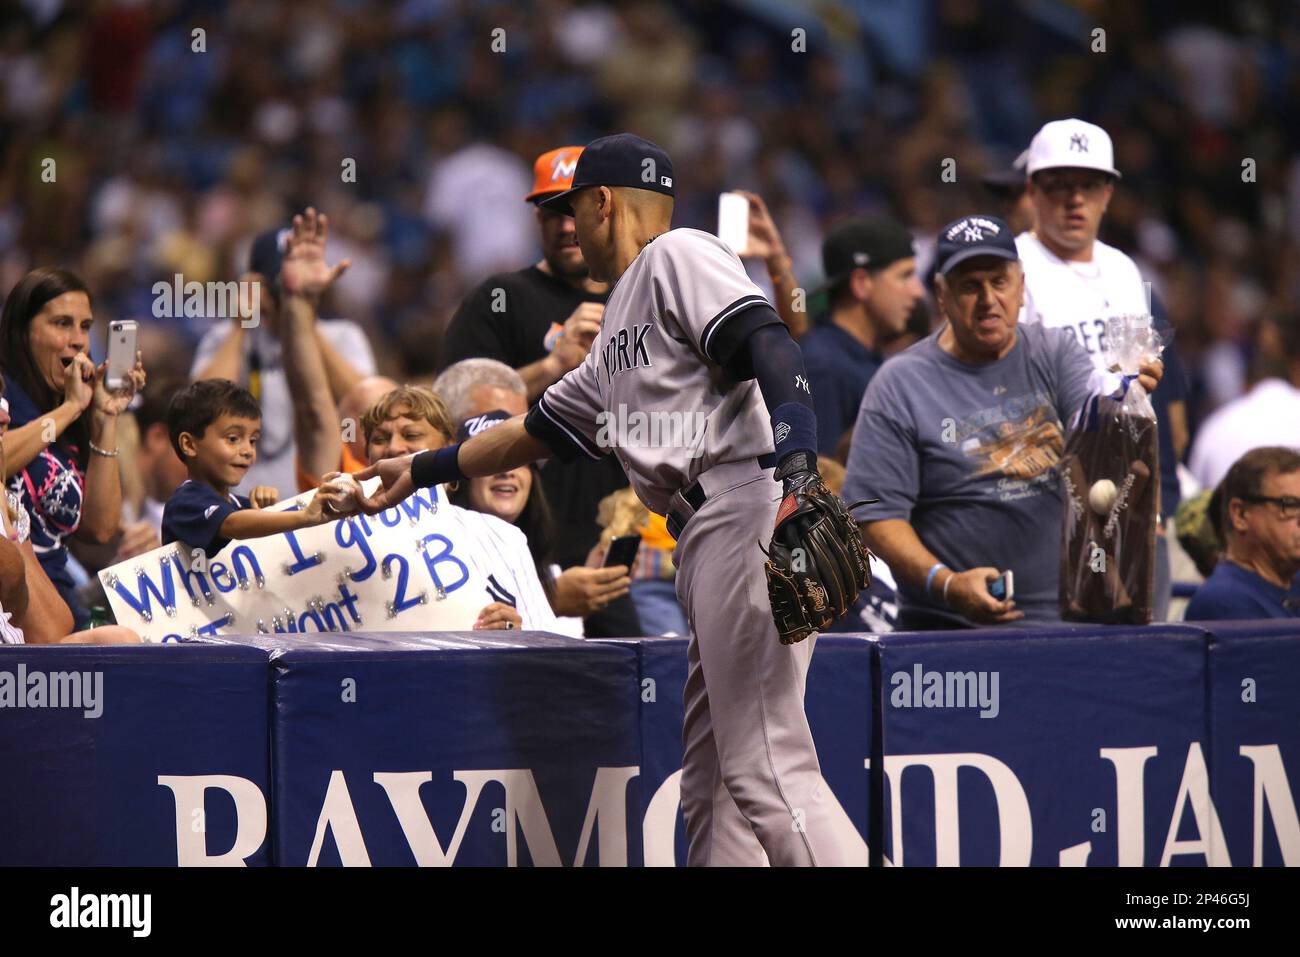 New York Yankees shortstop Derek Jeter (2) hands a ball to a young fan  between innings during a major league baseball game between the New York  Yankees and the Tampa Bay Rays